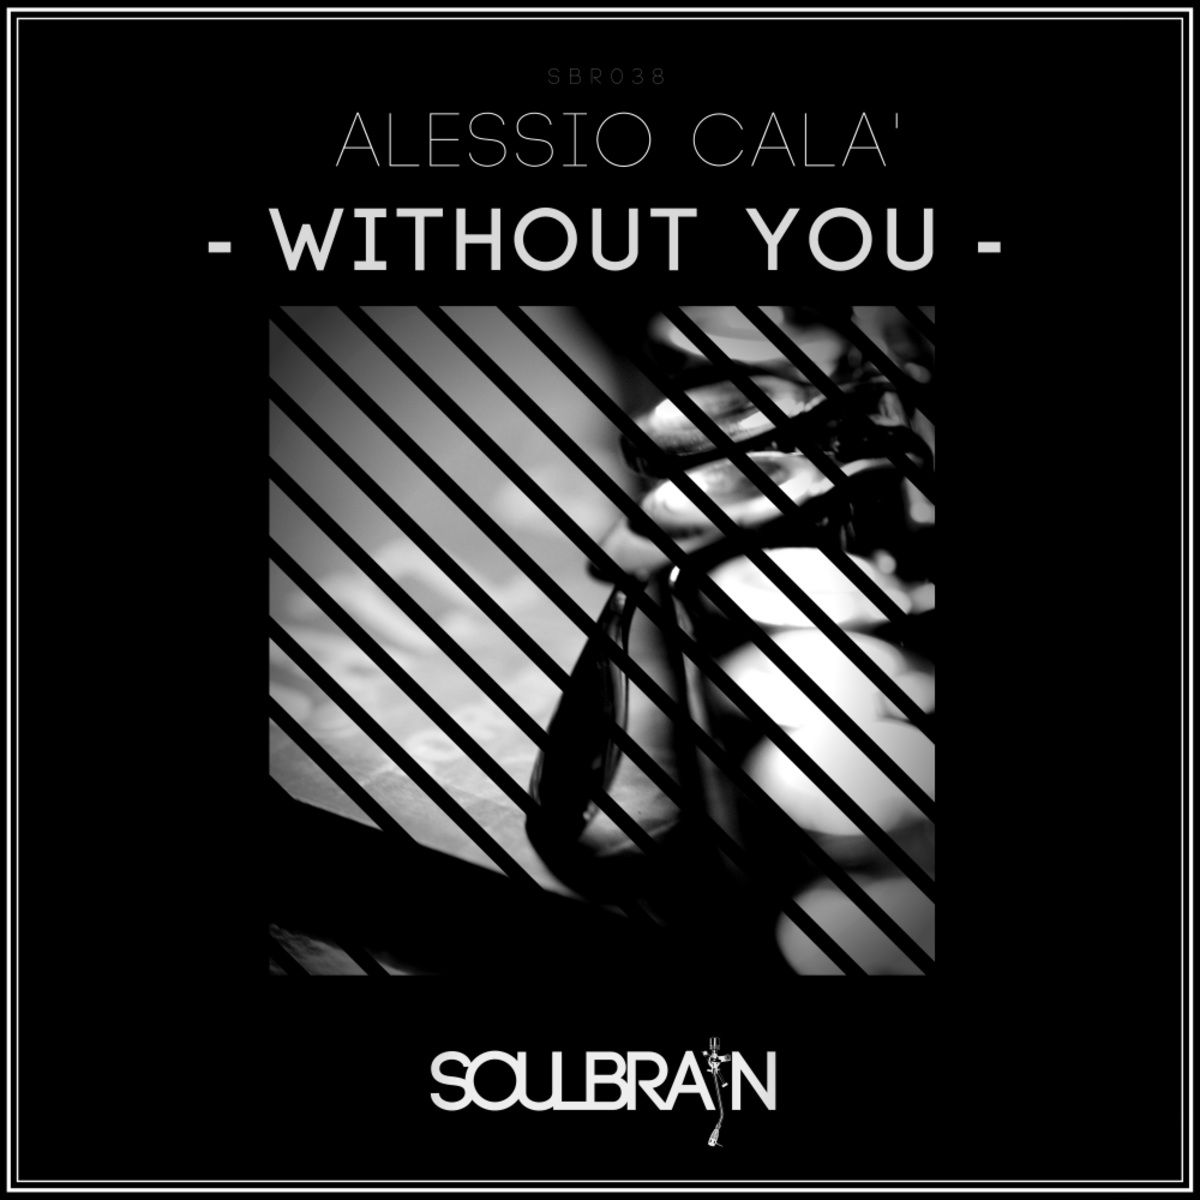 Alessio Cala' - Without You / Soul Brain Records